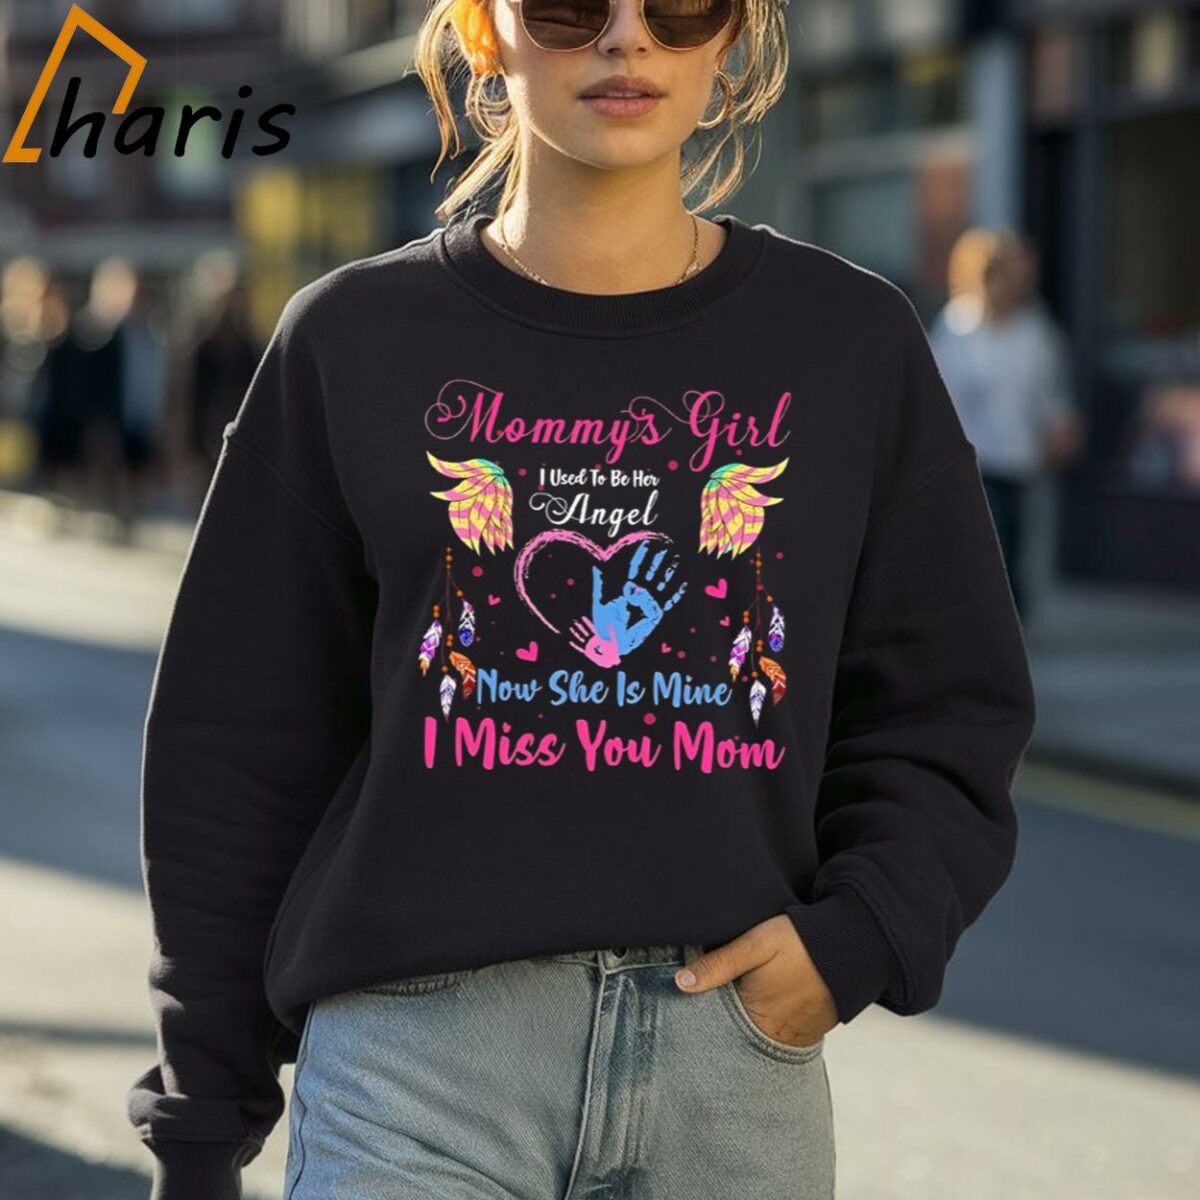 Mommys Girl I Used To Be Her Angel Now She Is Mine I Miss You Mom Shirt 4 Sweatshirt